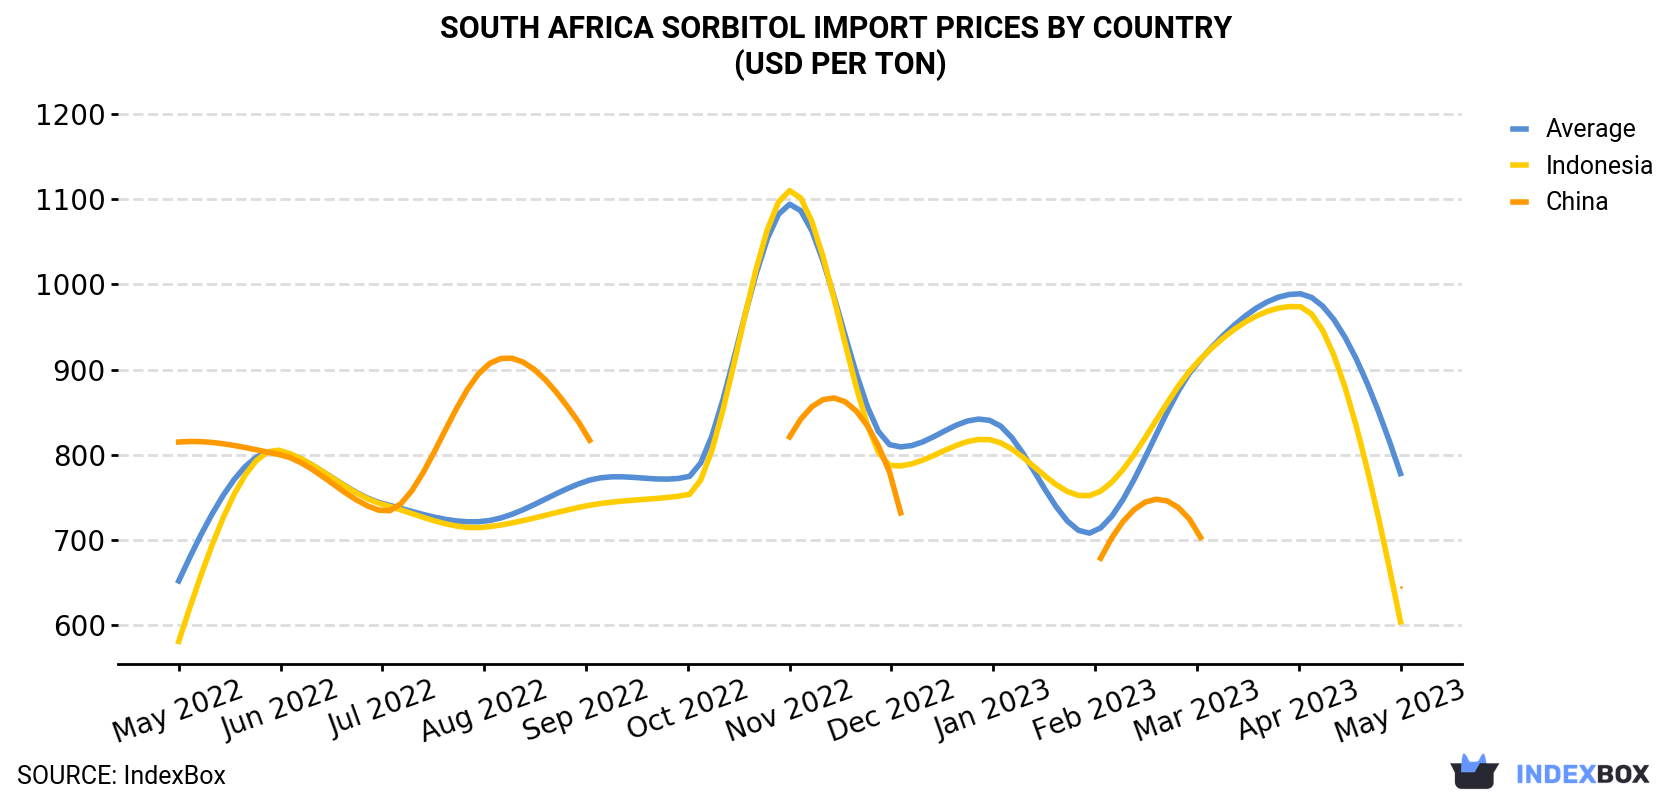 South Africa Sorbitol Import Prices By Country (USD Per Ton)